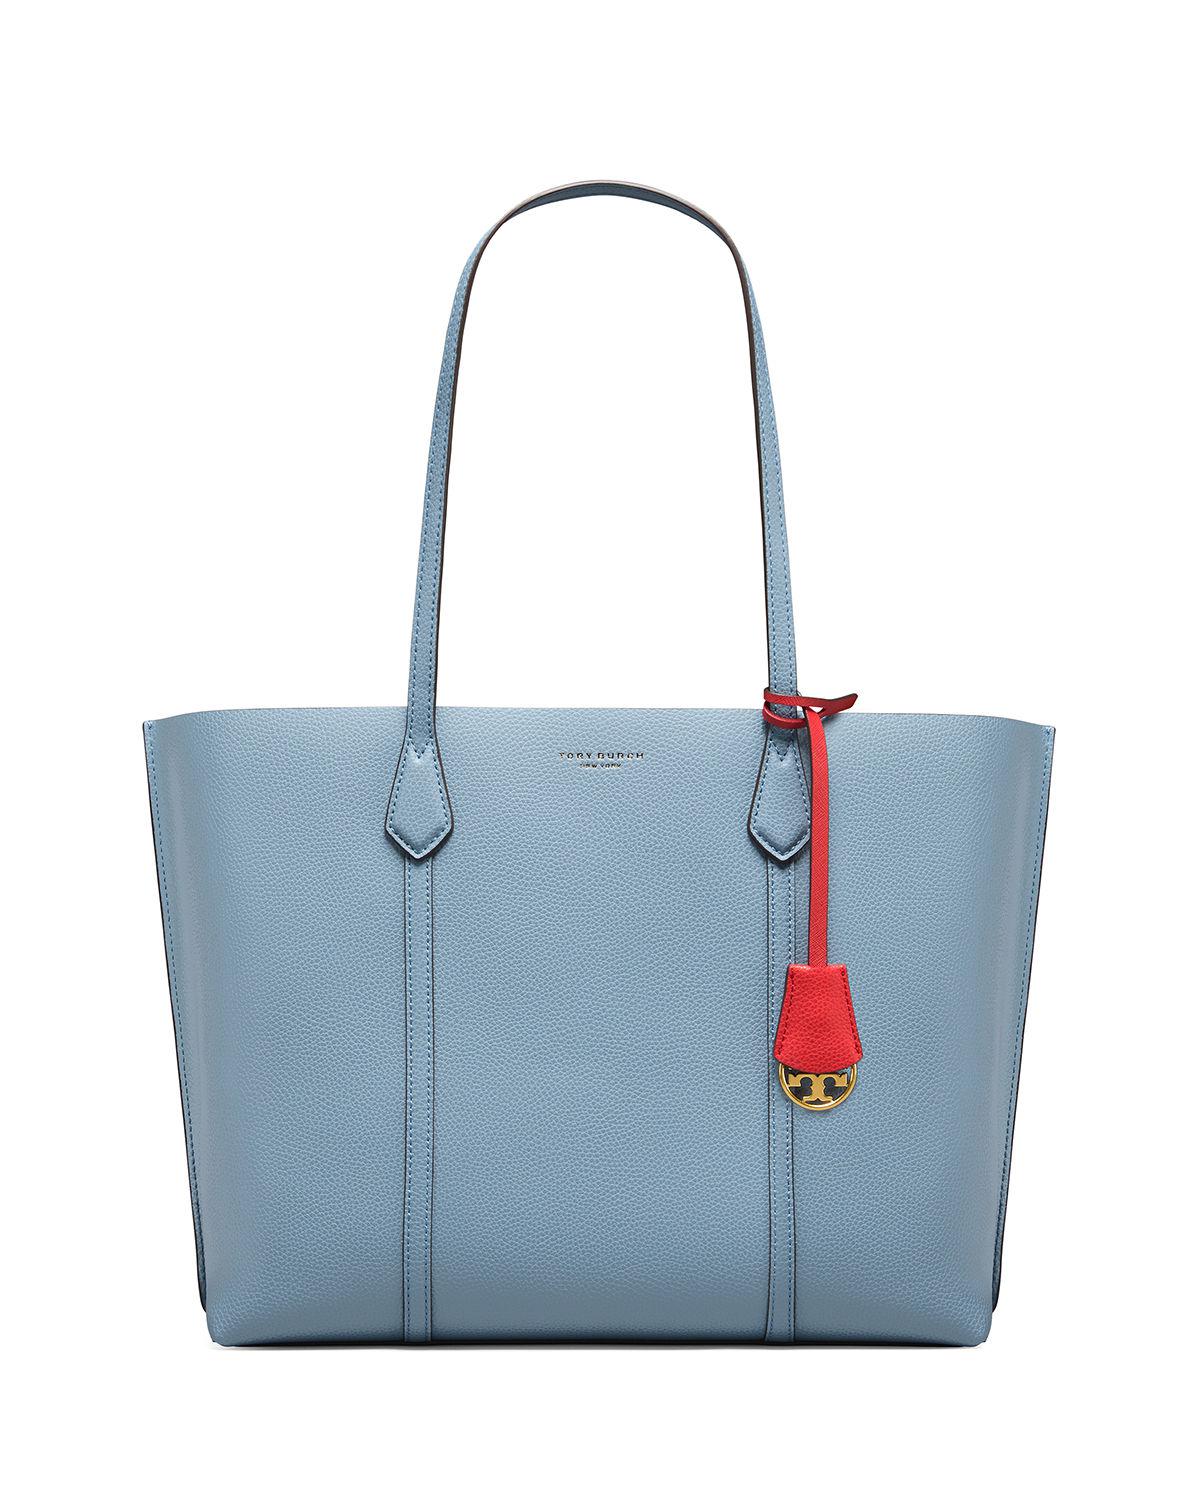 Tory Burch Perry Triple Women's Leather Tote Bag Light Blue Gray